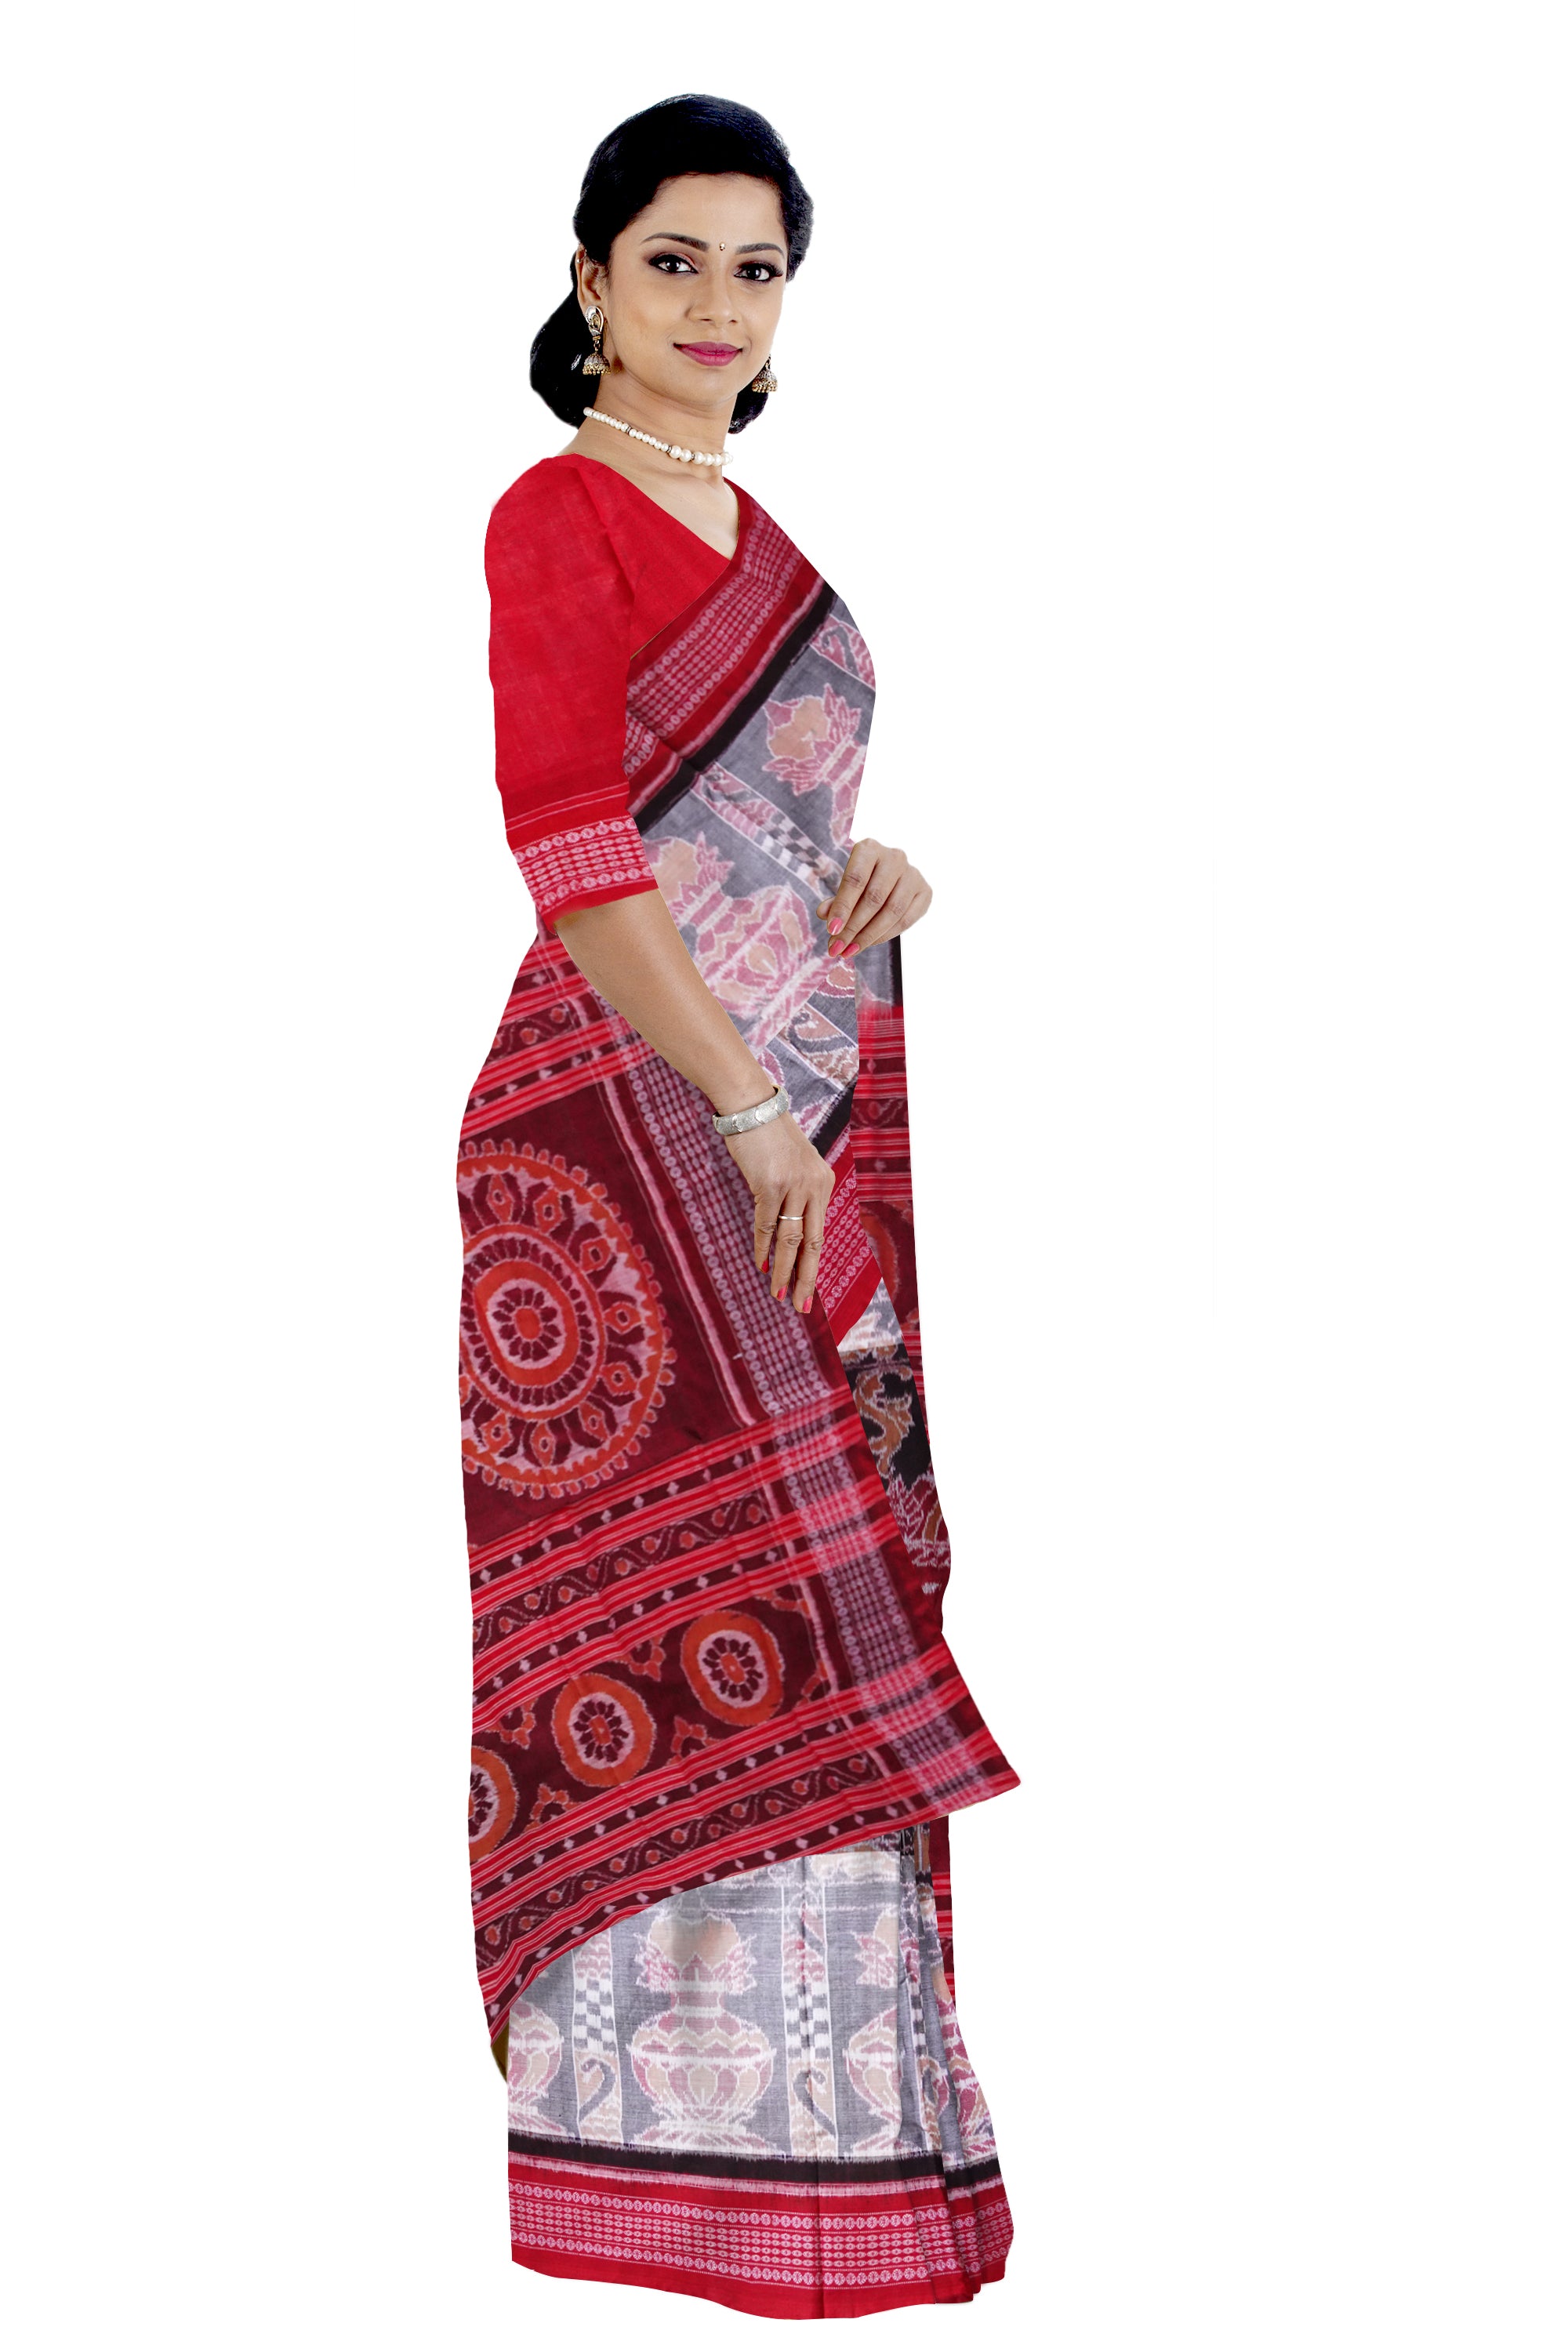 Royal Elephant and Kalasha design in traditionally work on full body in Black , white and red colour pure cotton saree. - Koshali Arts & Crafts Enterprise